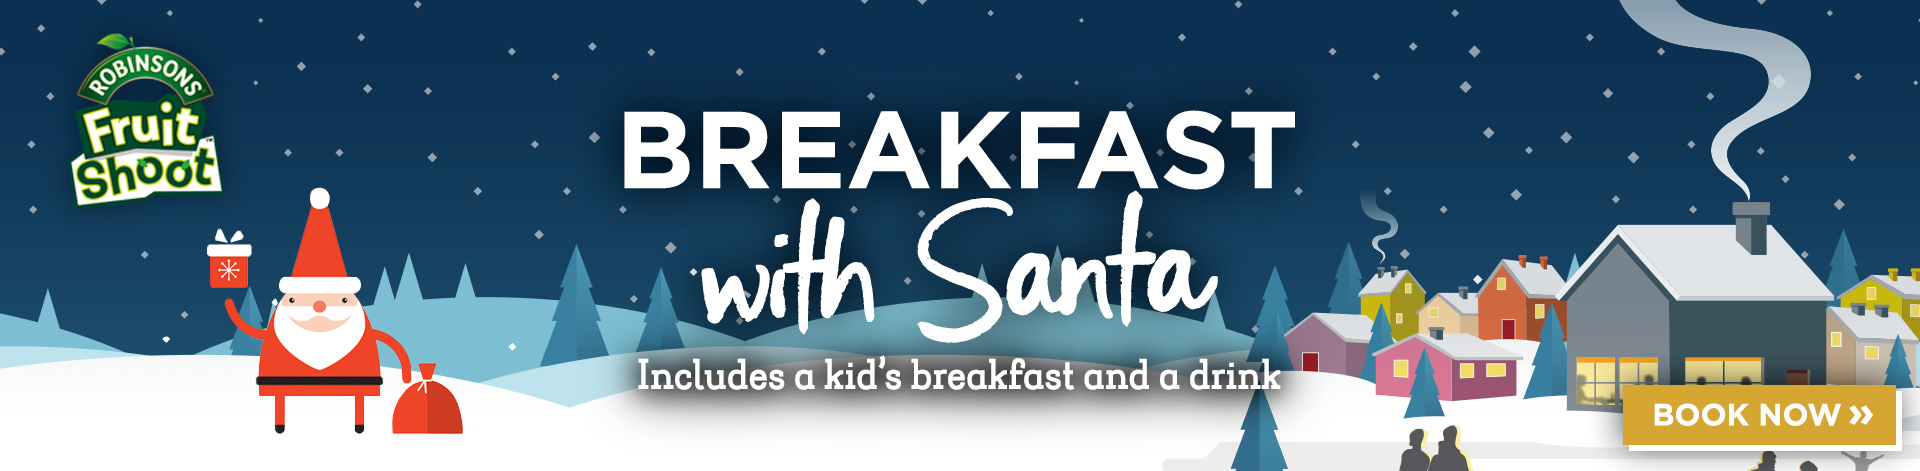 Breakfast with Santa menu at The Ferry Hotel